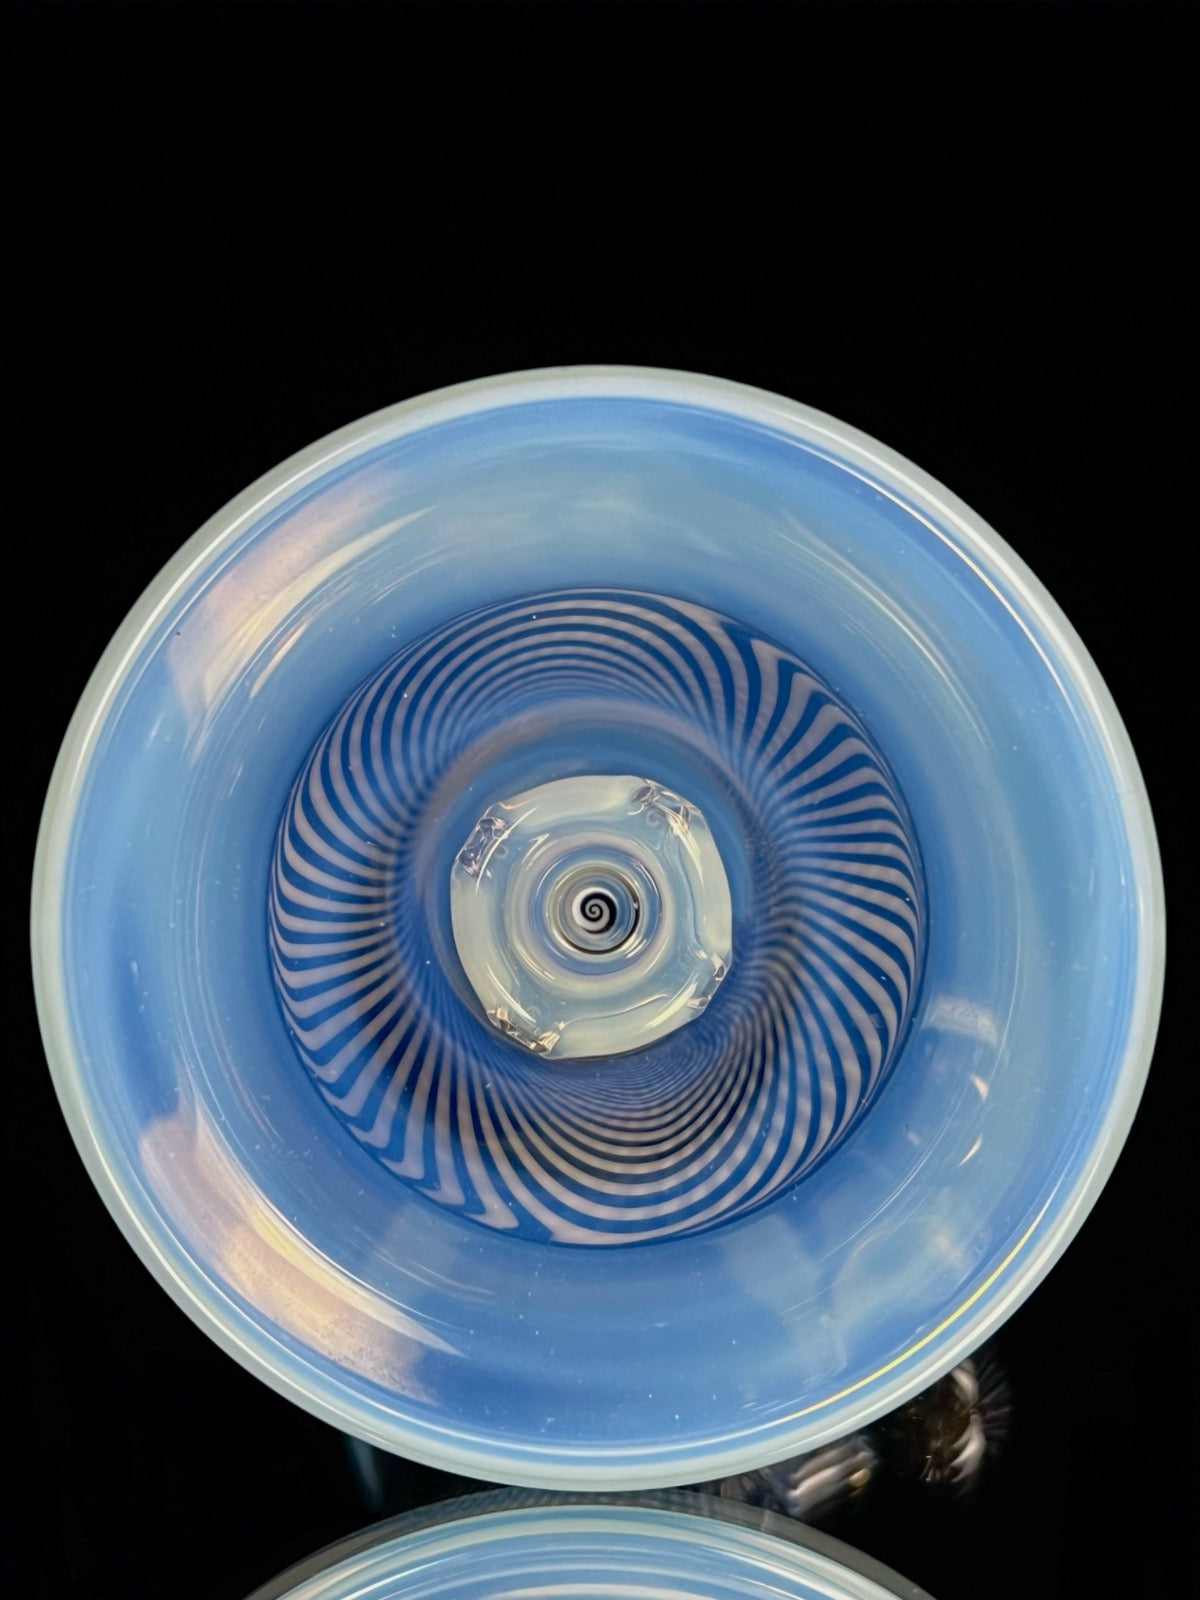 Moonstone classic hypno jawn by Jared Wetmore